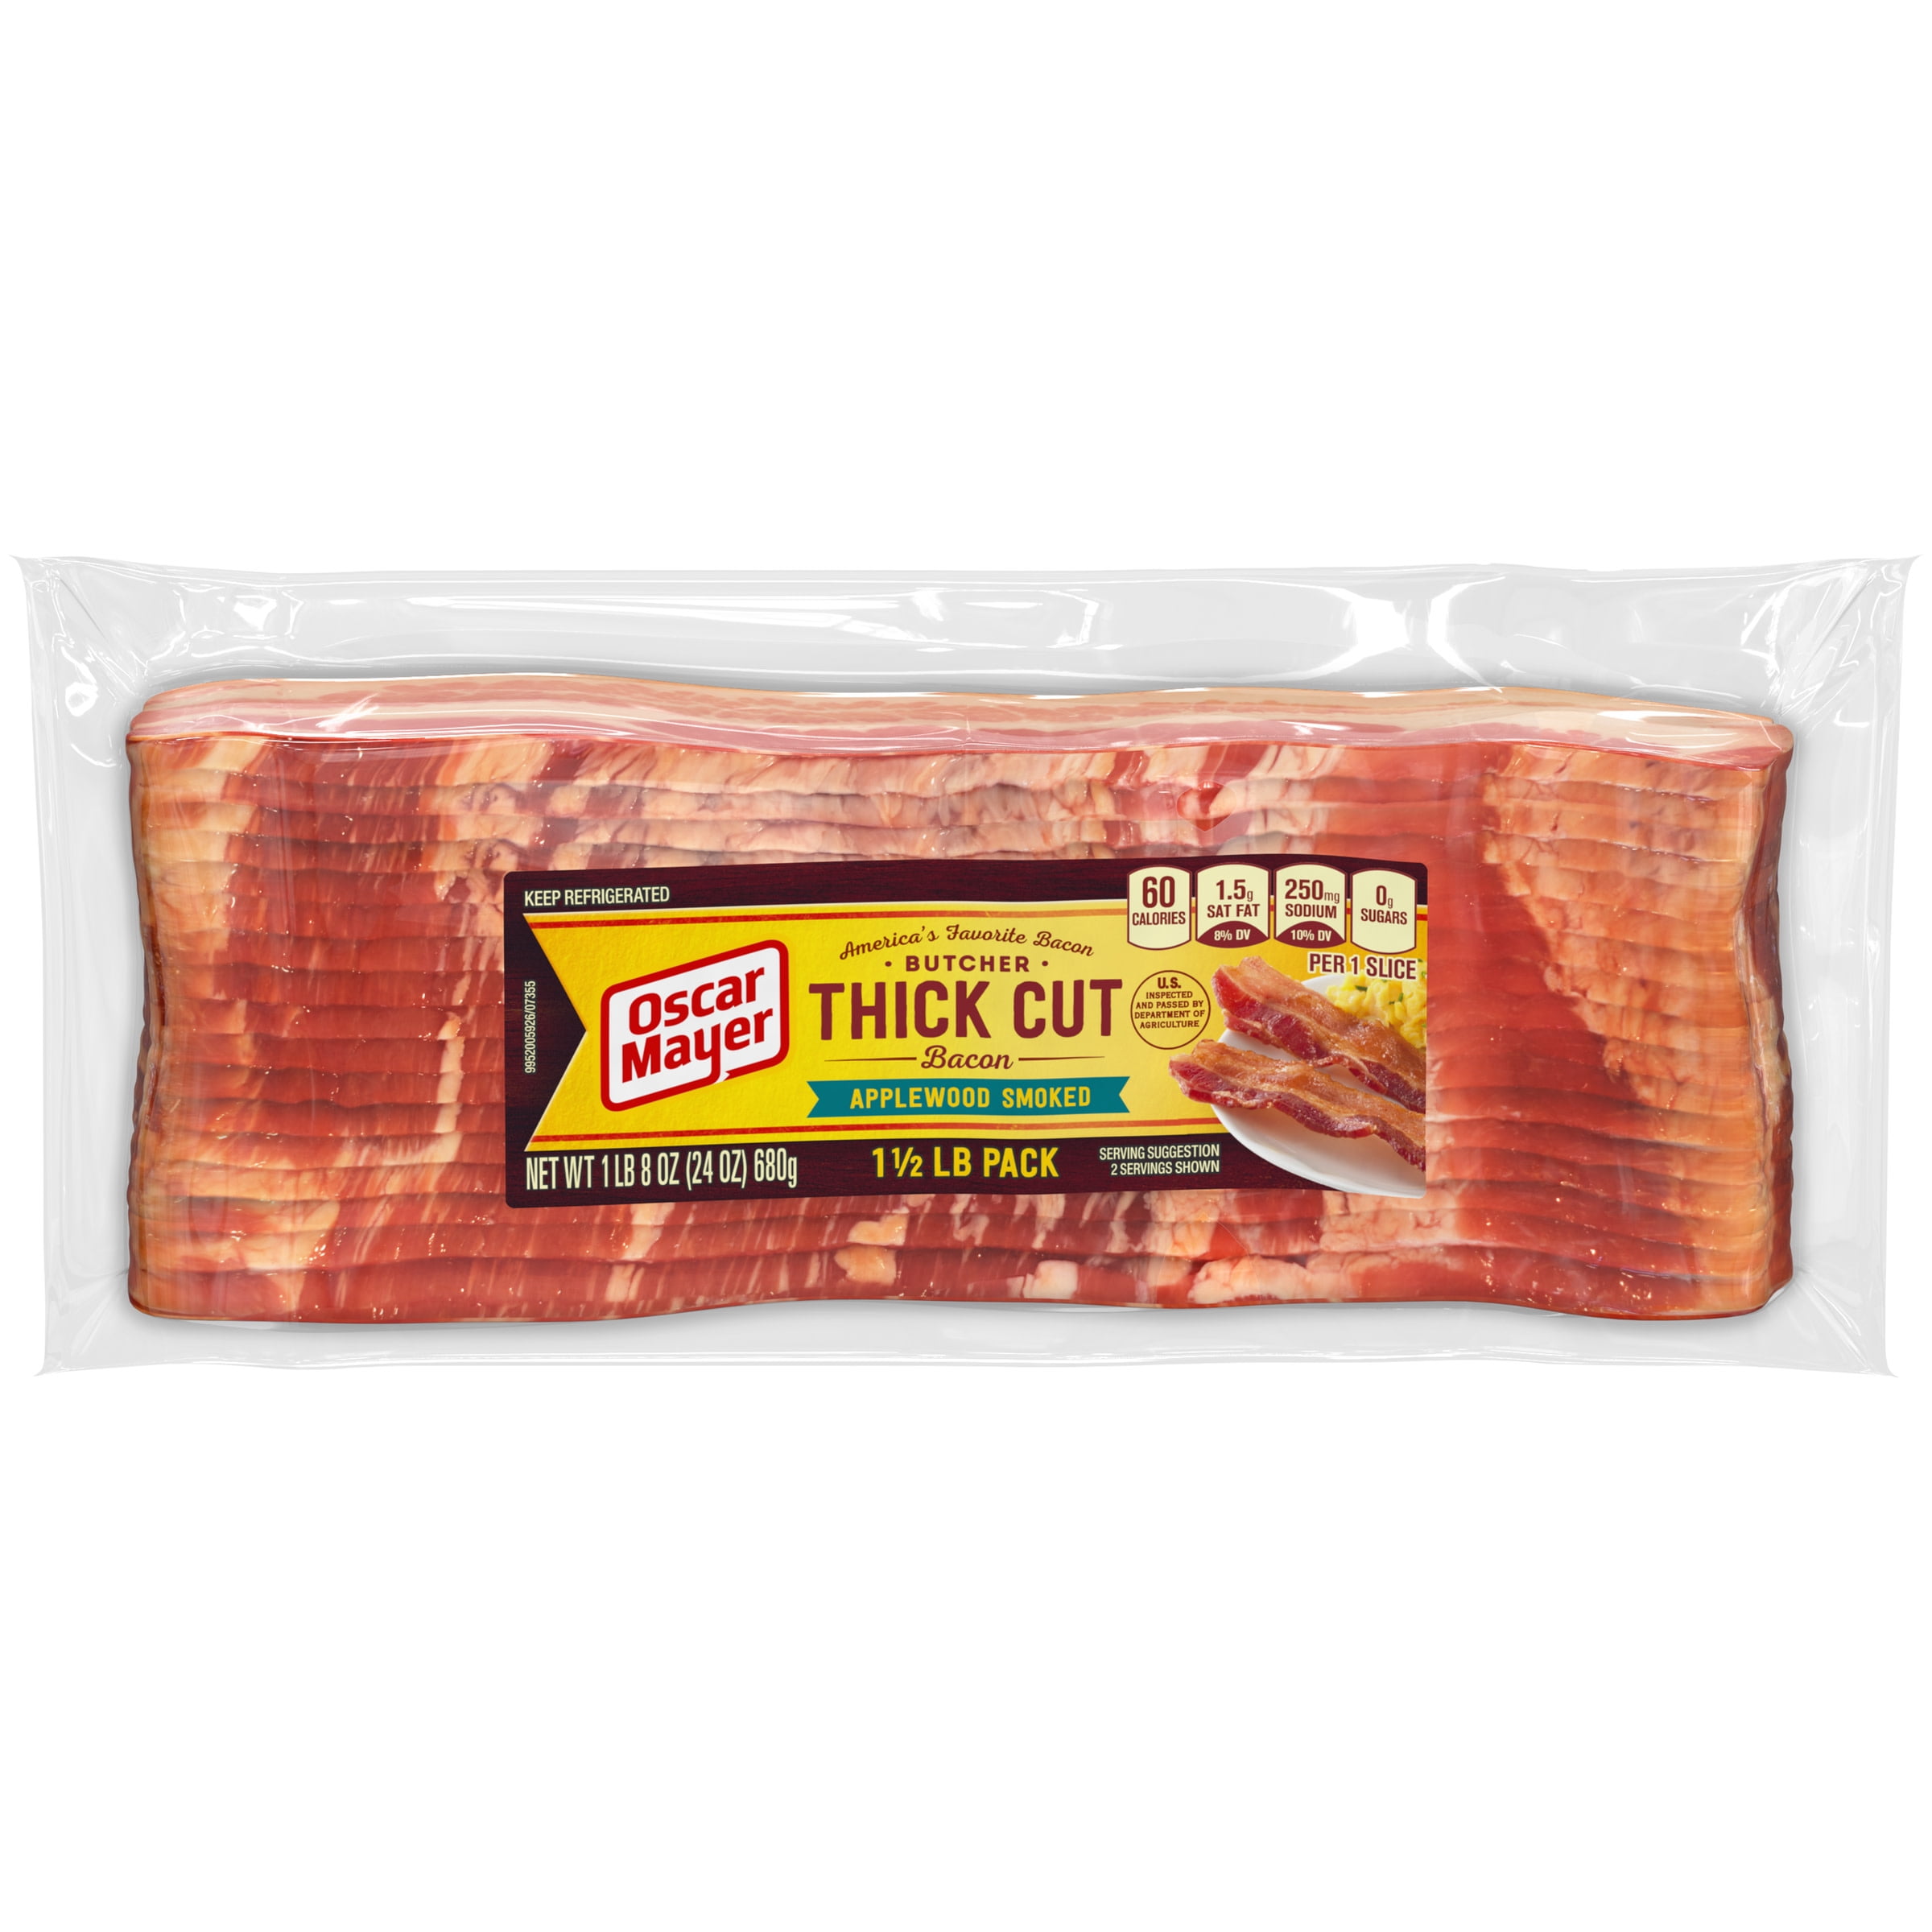 Best Bacon - Applegate, Costco Review